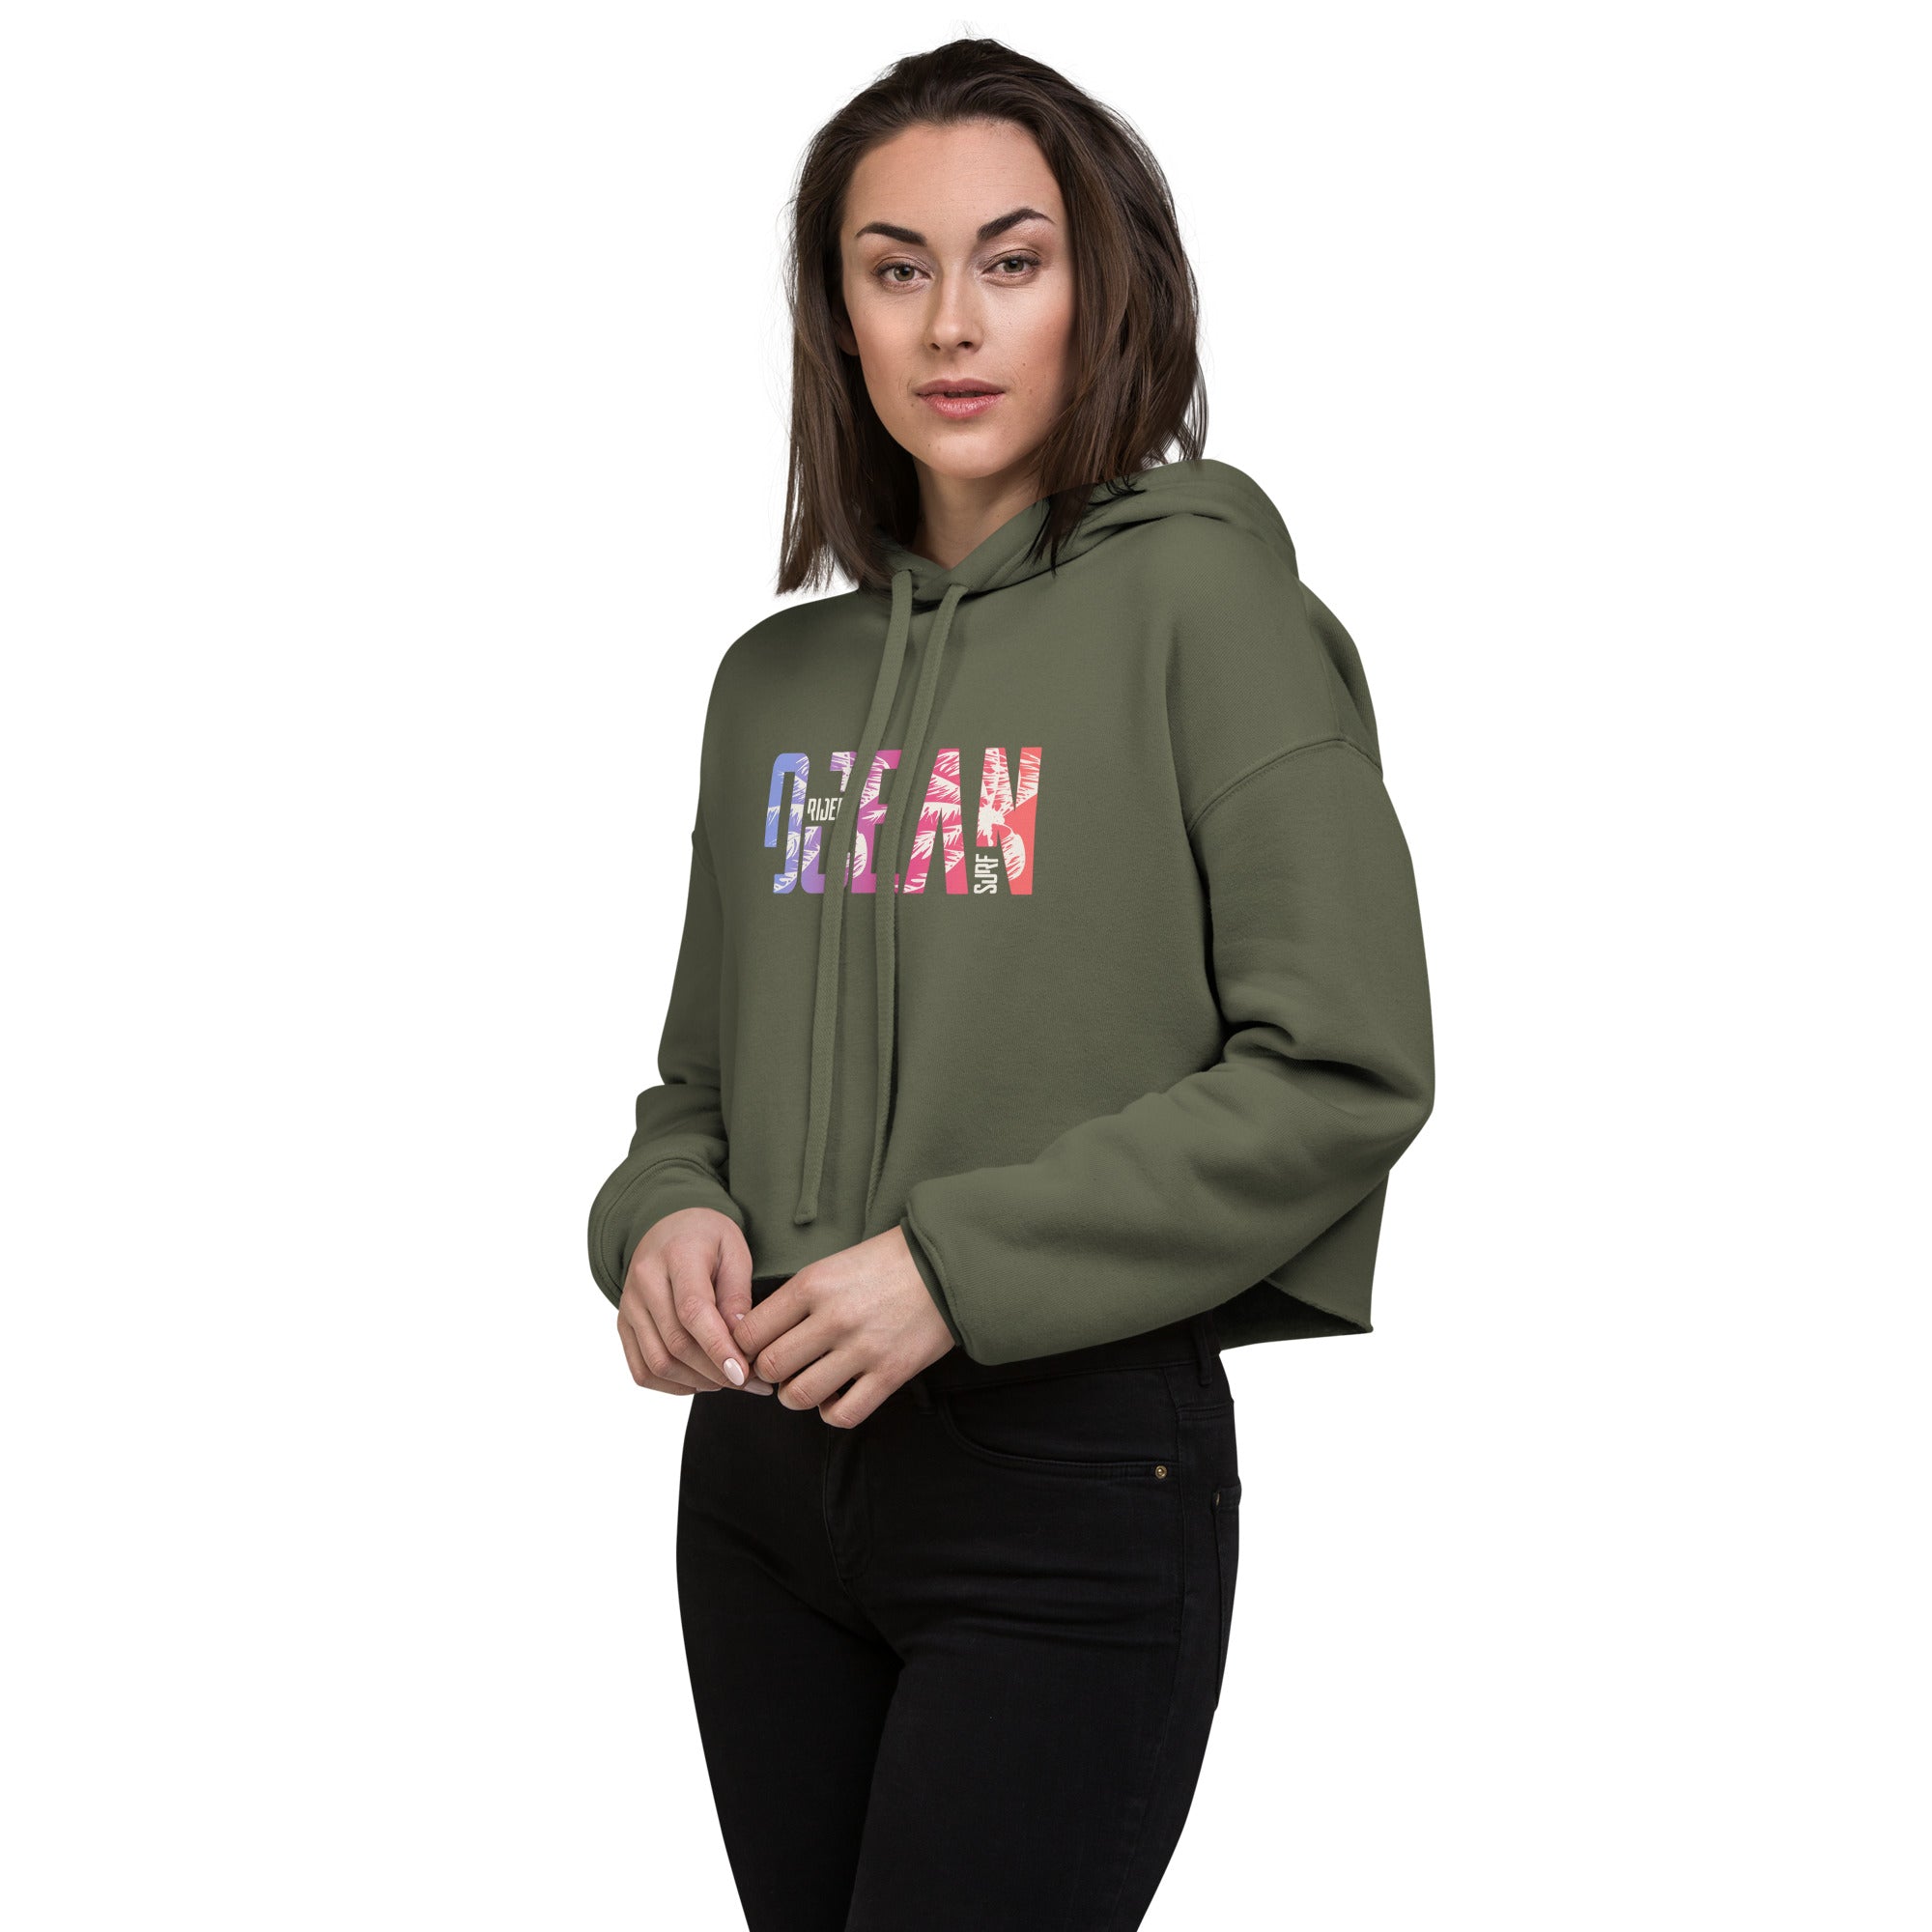 SORTYGO - Surf Riders Dream Cropped Hoodie in Military Green